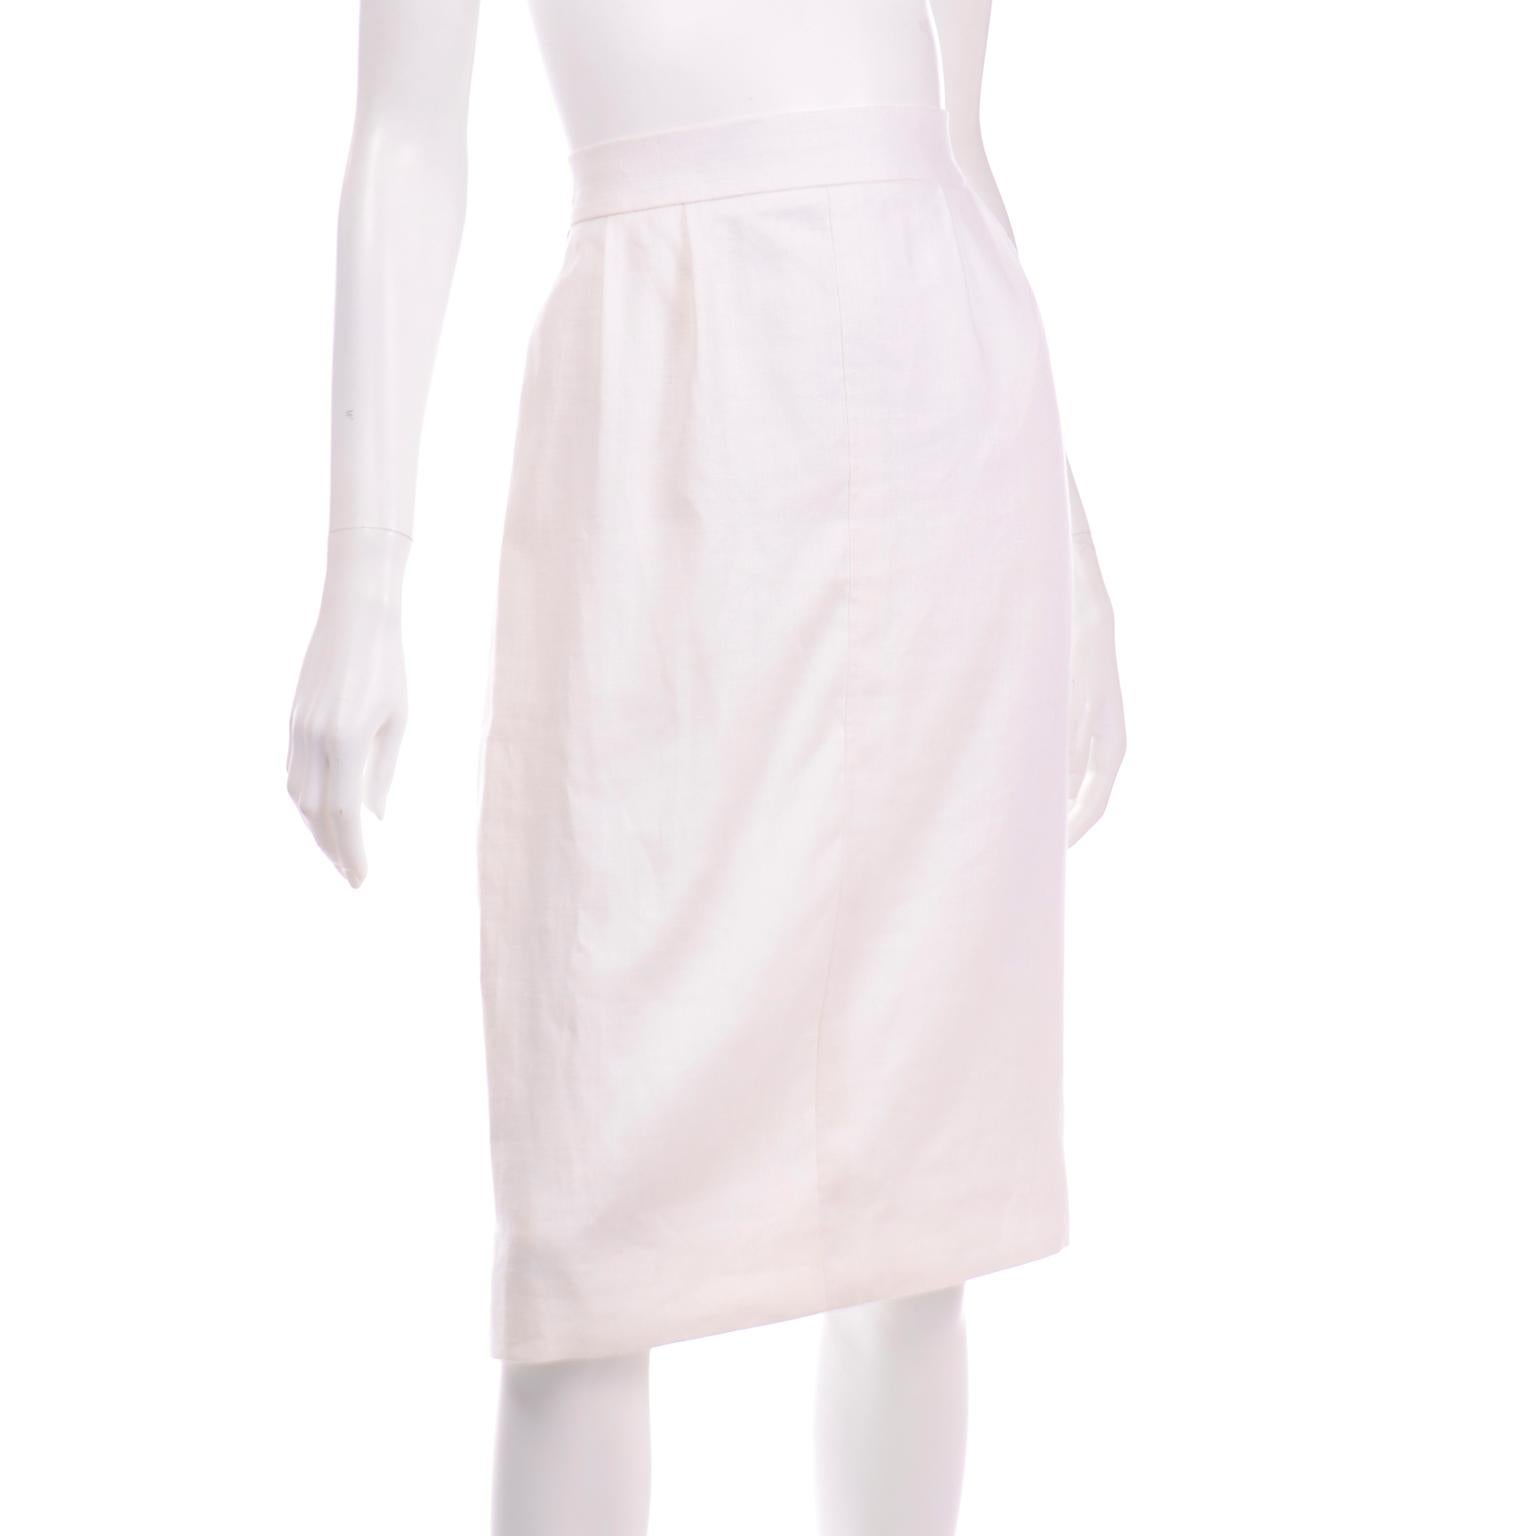 This is a vintage white linen pencil skirt designed by Yves Saint Laurent for the Rive Gauche label. This is a such a great staple piece to add to any modern wardrobe and it is so beautifully made! There functional side pockets and pleats along the